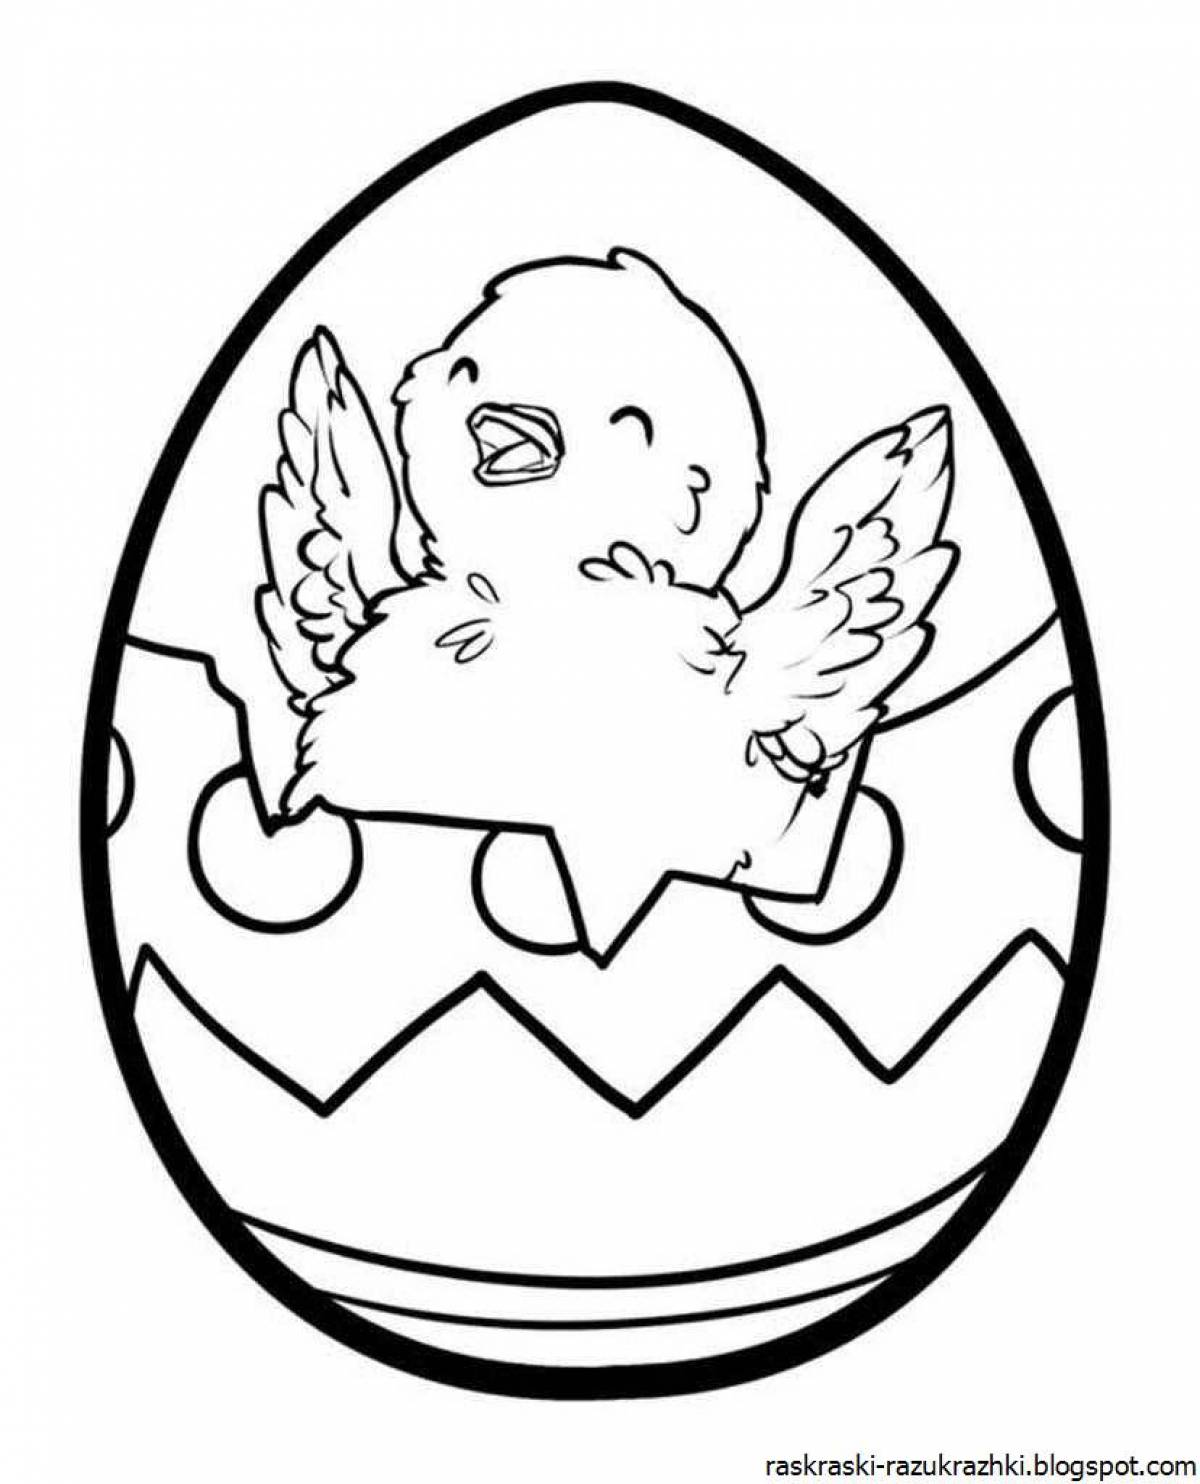 Coloring page magical easter egg